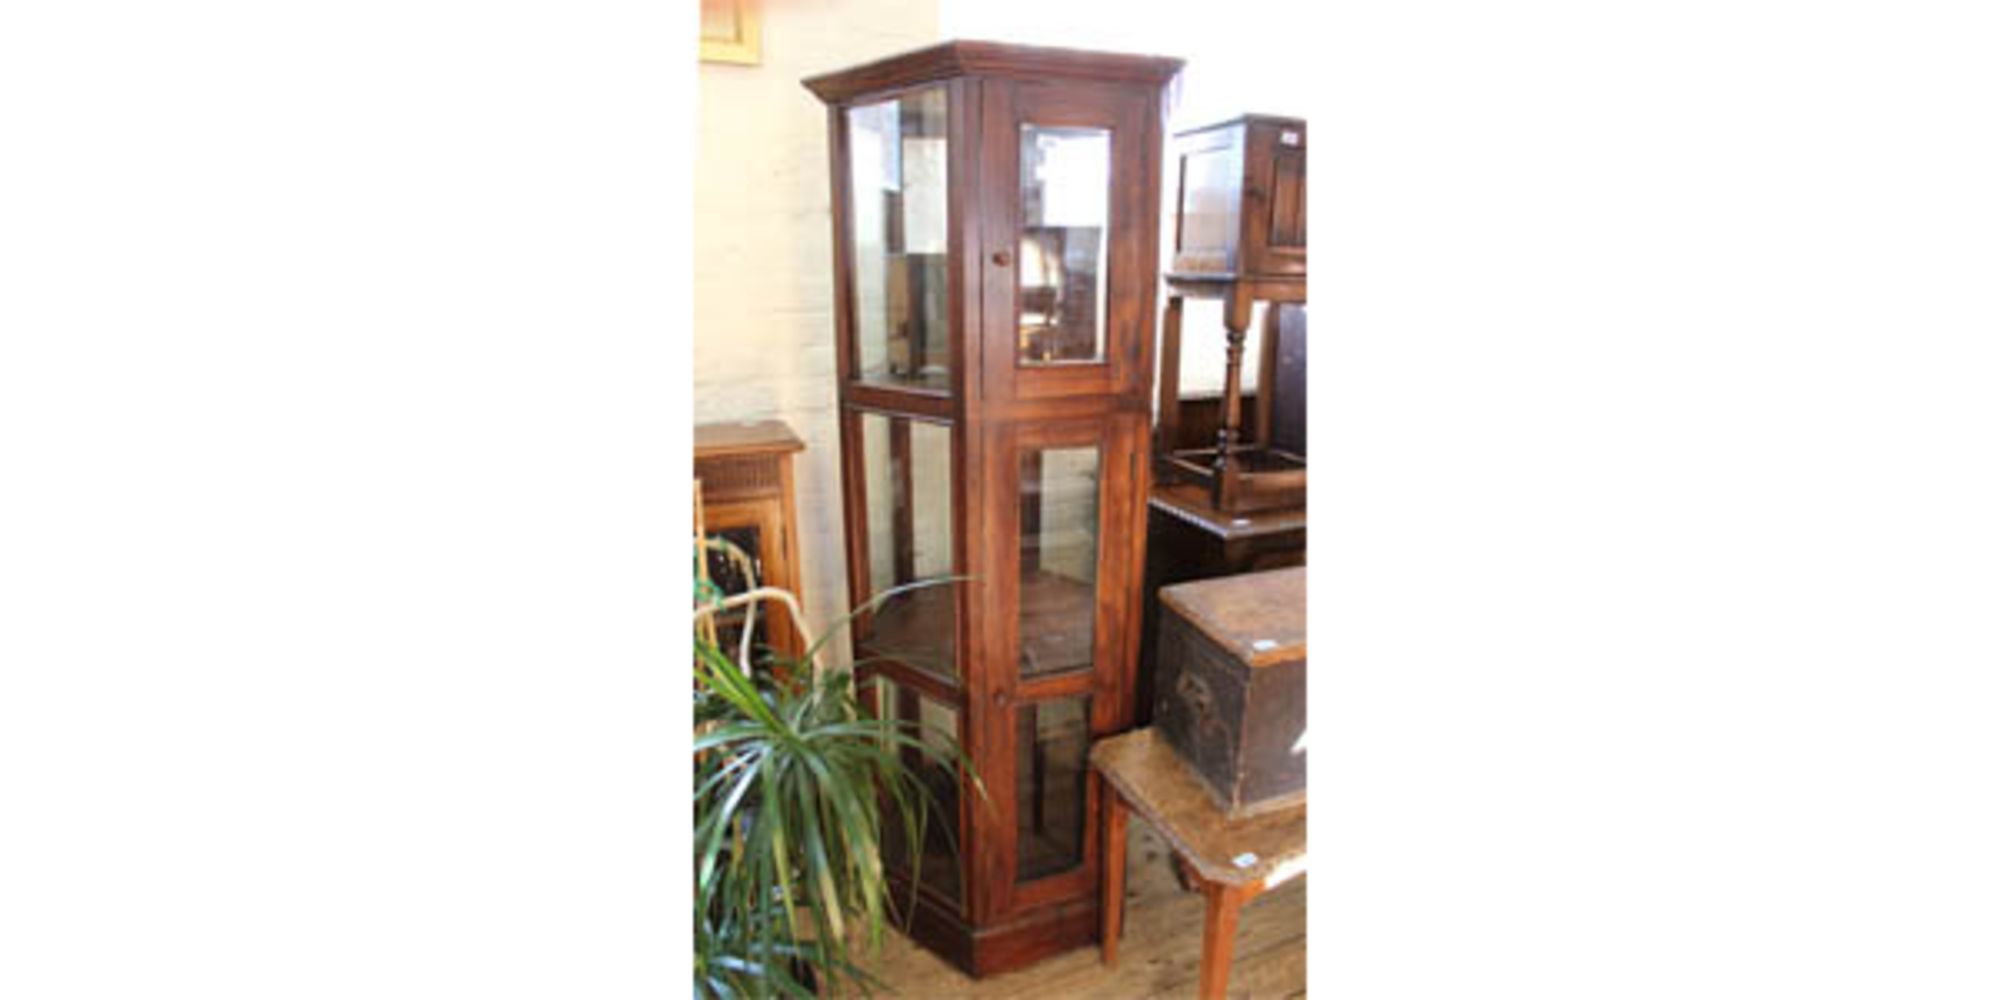 Antique and Country Pine Furniture with Rugs and Clocks